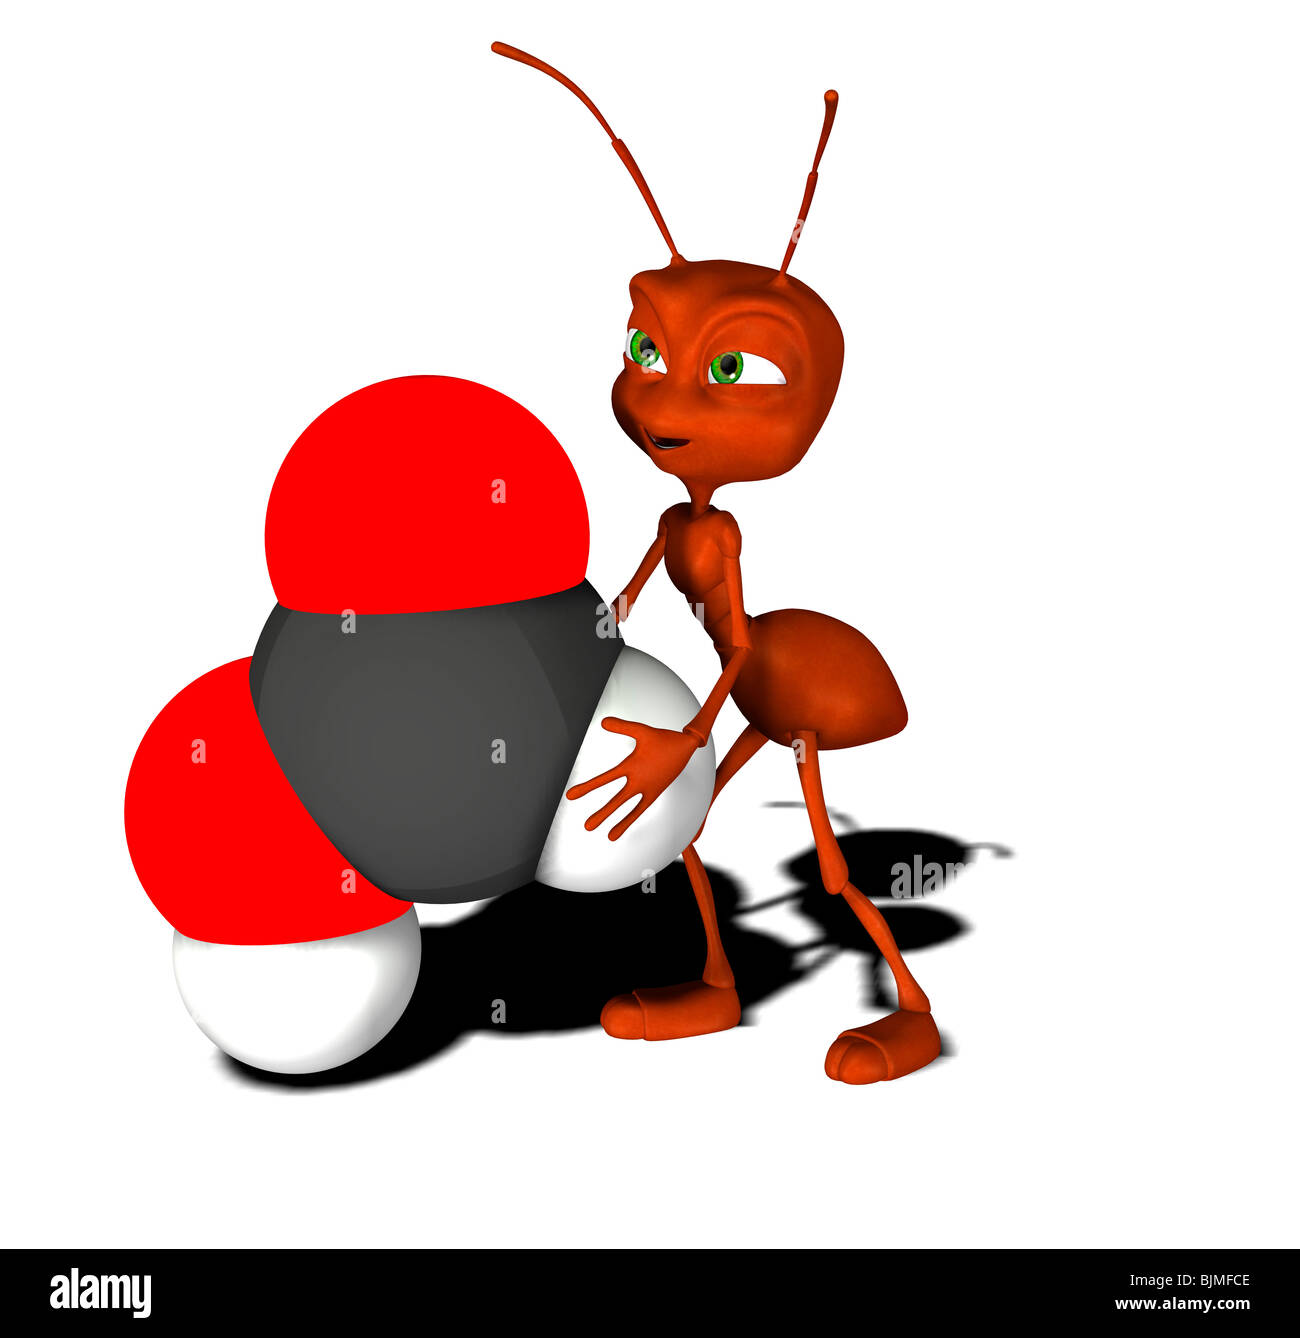 formic acid molecule with ant Stock Photo